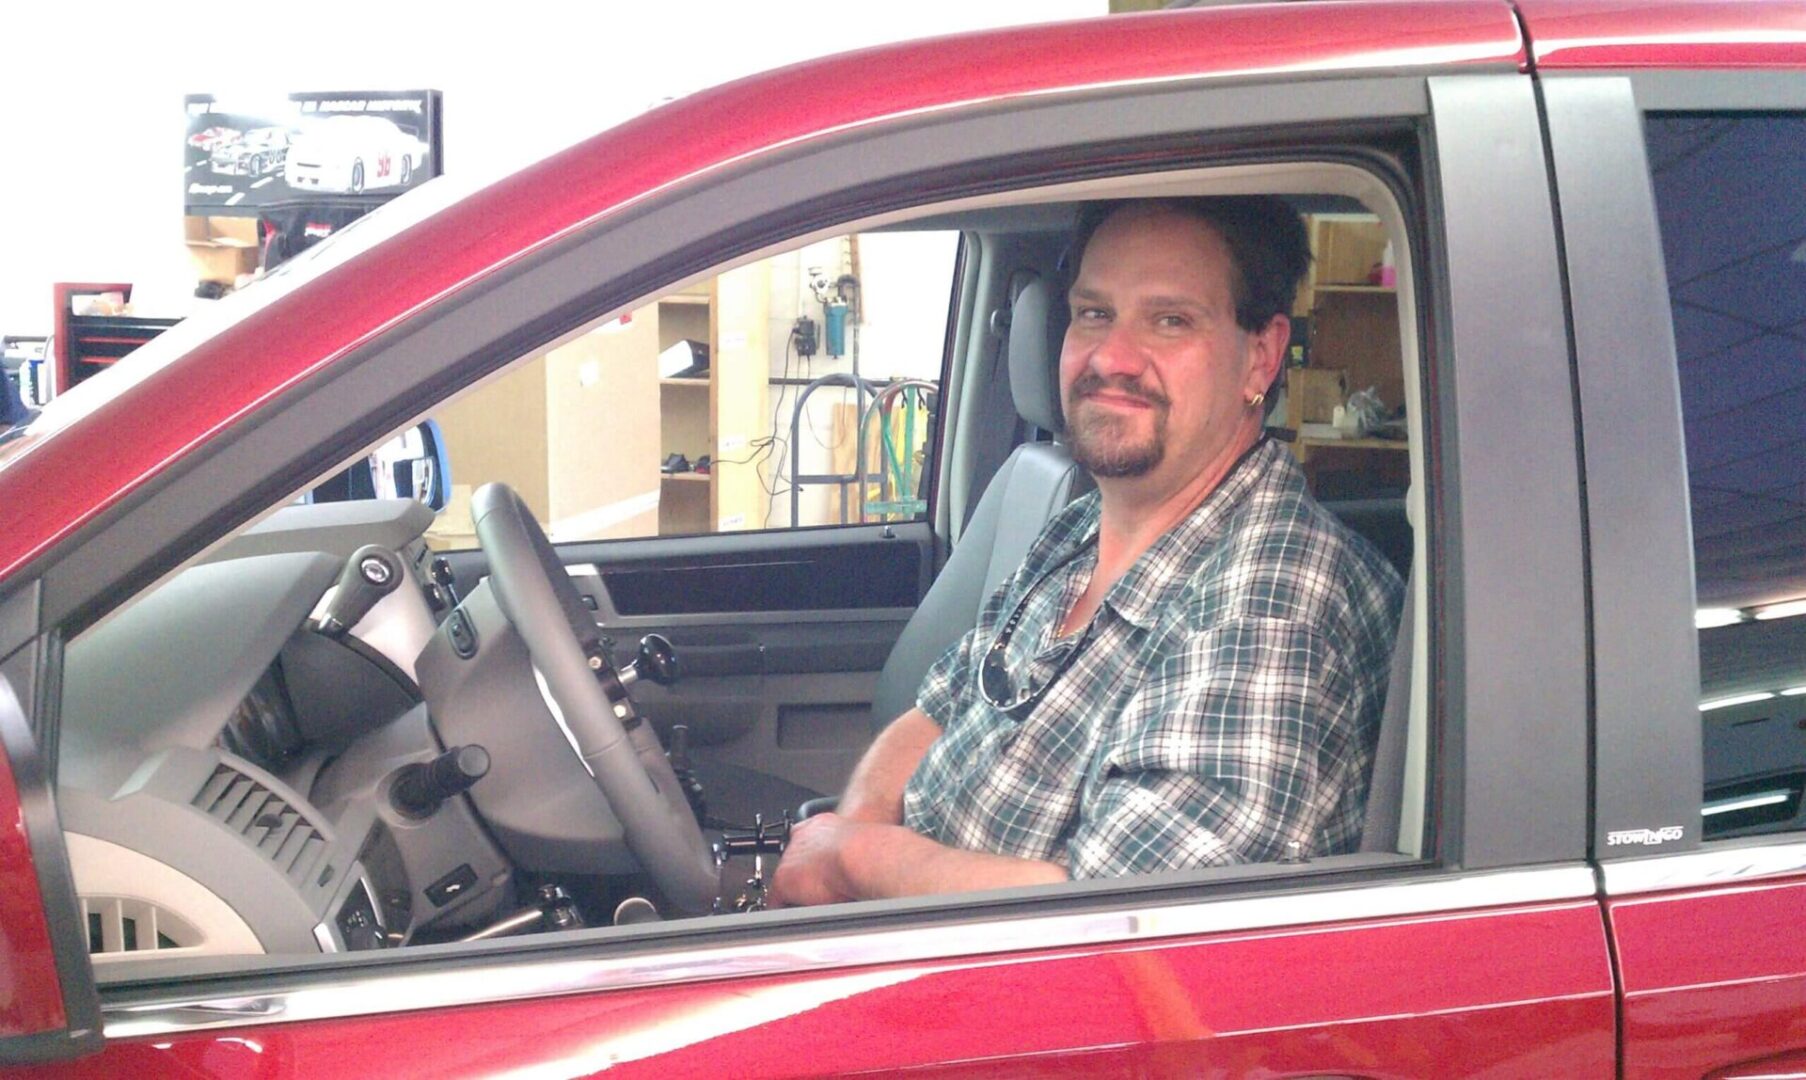 A smiling man inside a red car